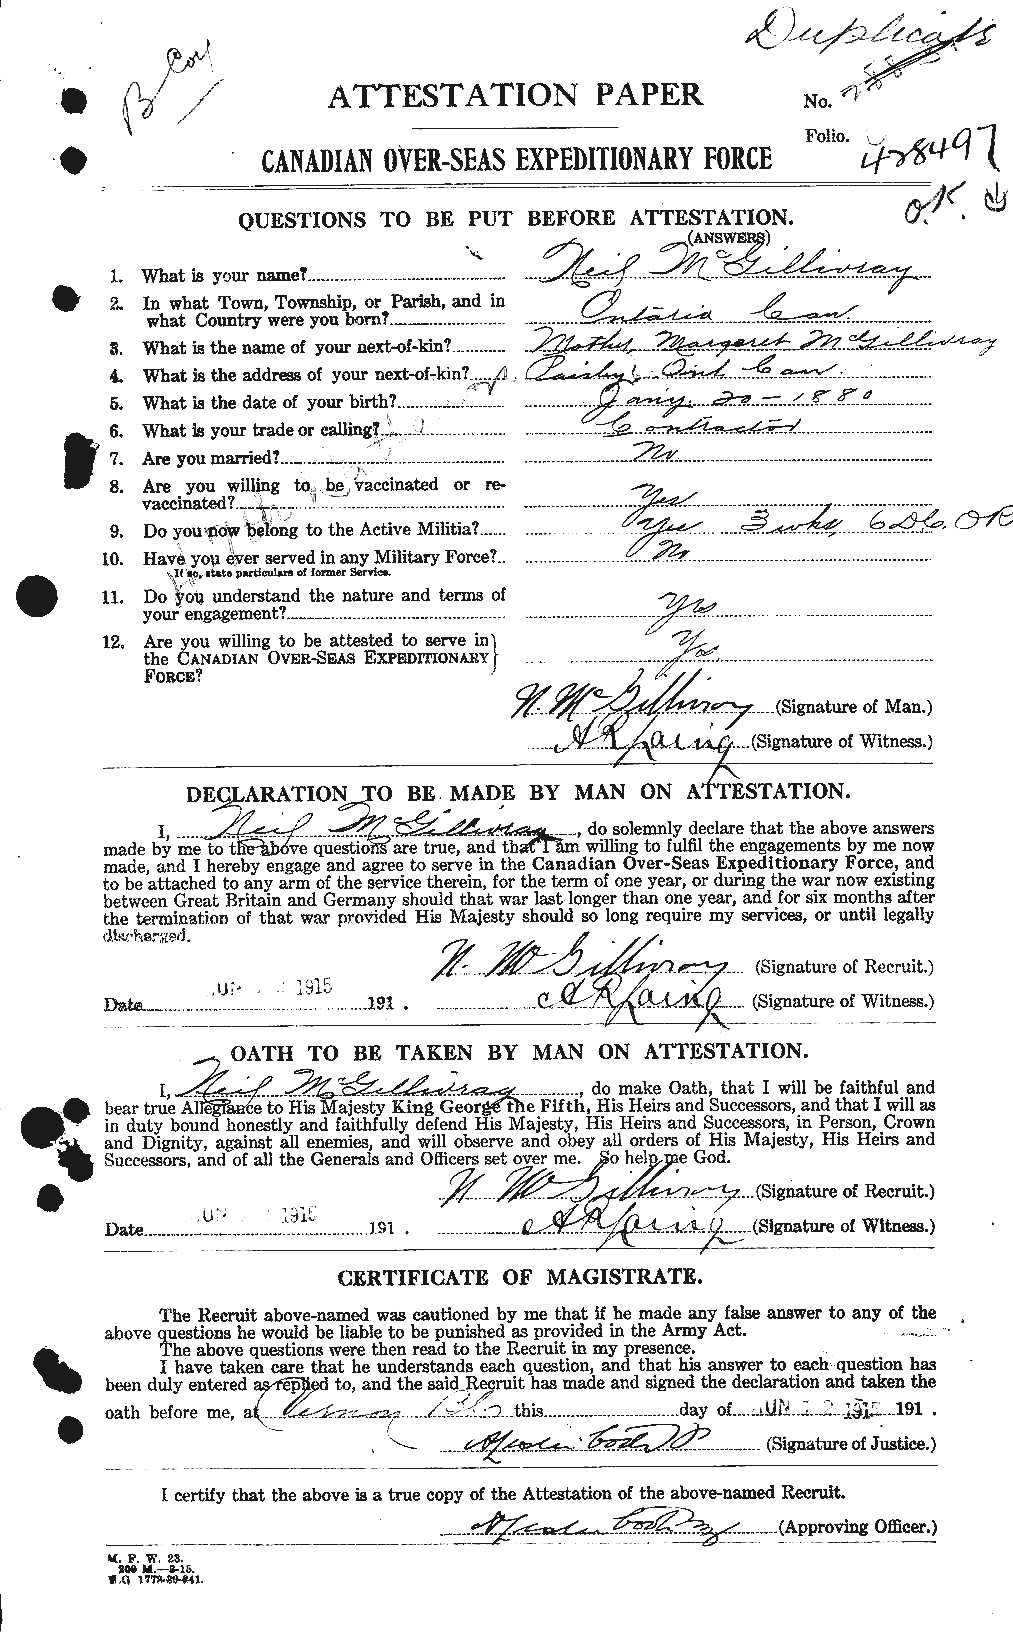 Personnel Records of the First World War - CEF 525501a